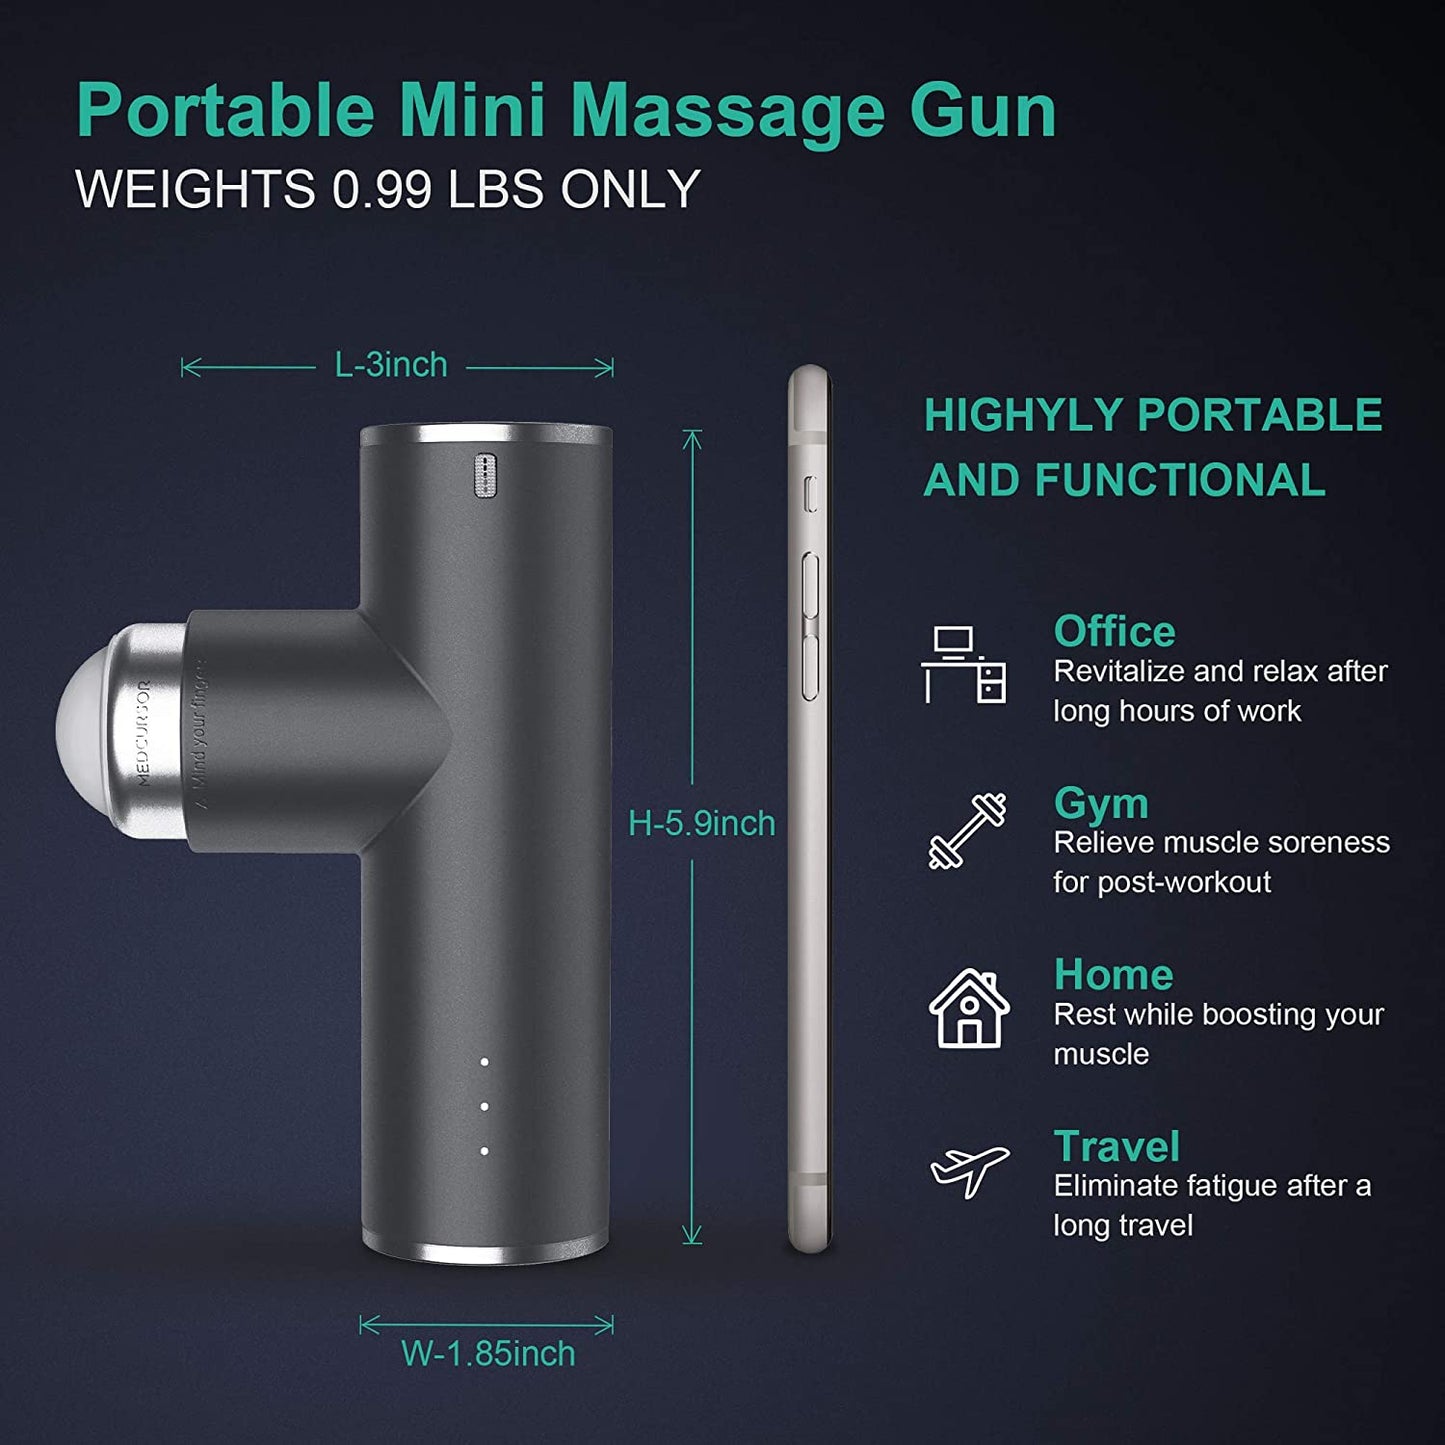 Portable Mini Massage Gun, Quiet Powerful Brushless Motor, 4 Heads and 3 Modes Helps Relieve Soreness Gray